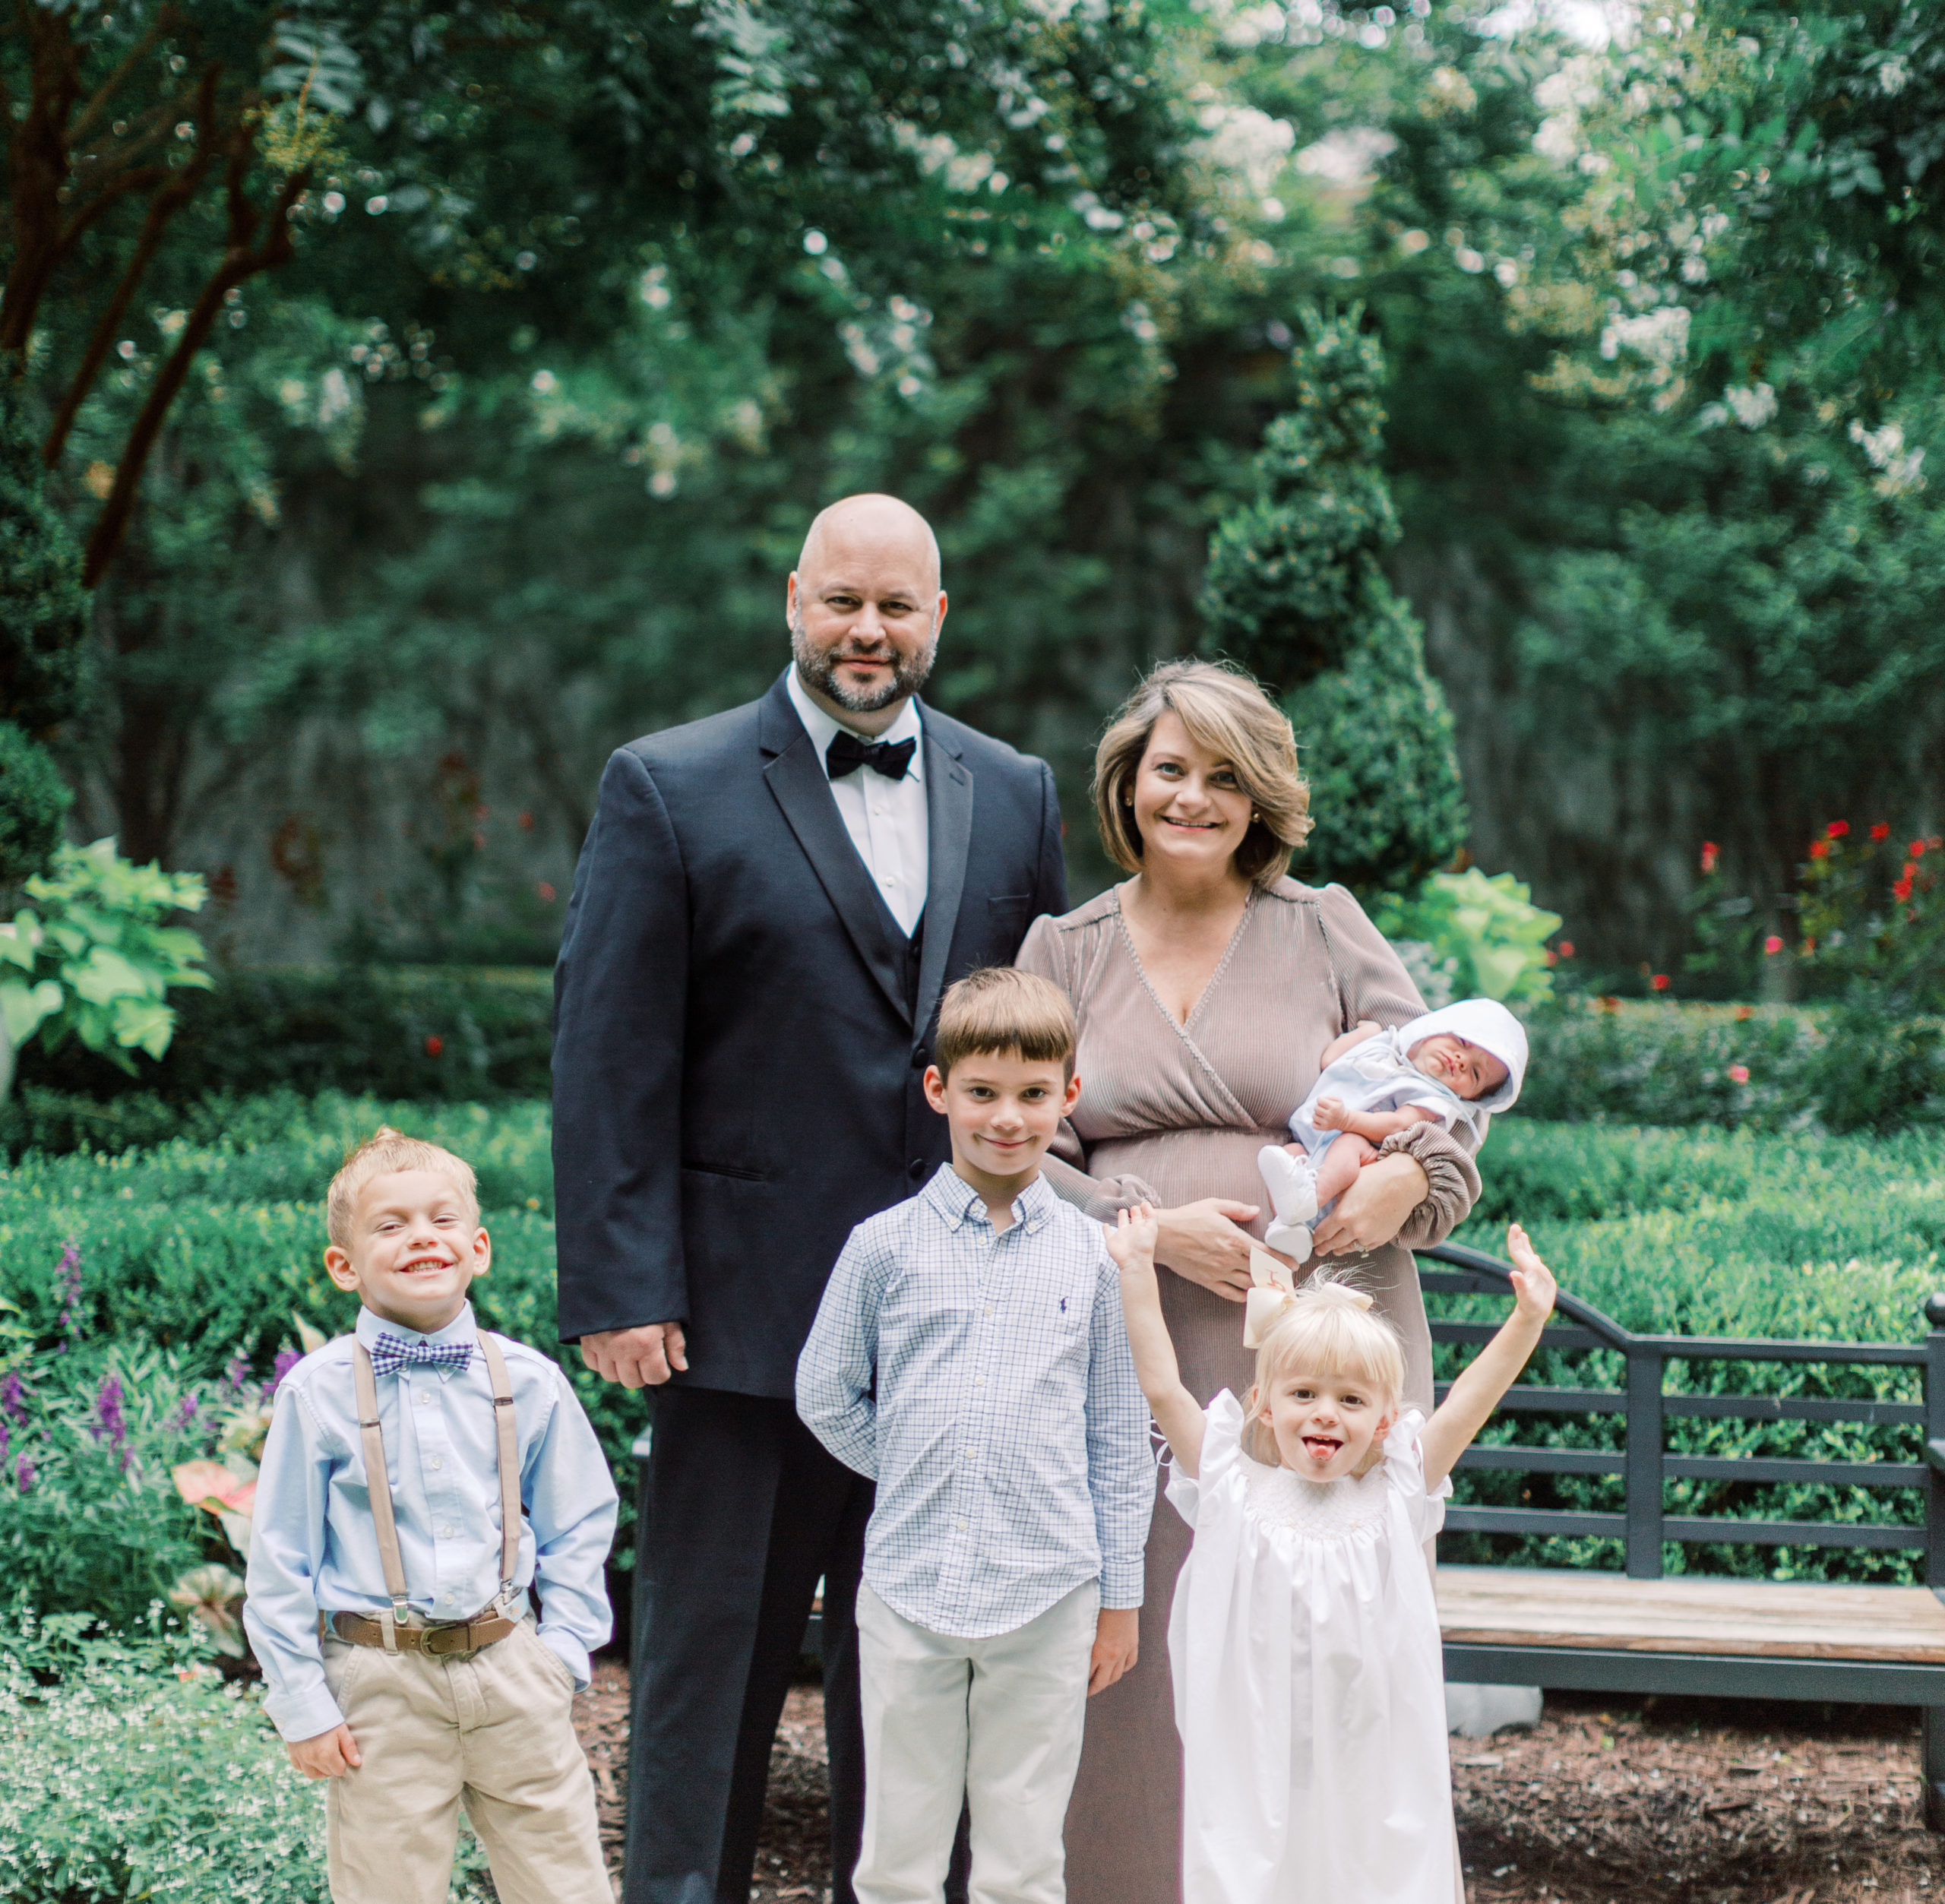 Anna Swanson and her family - Savannah Wedding Planners